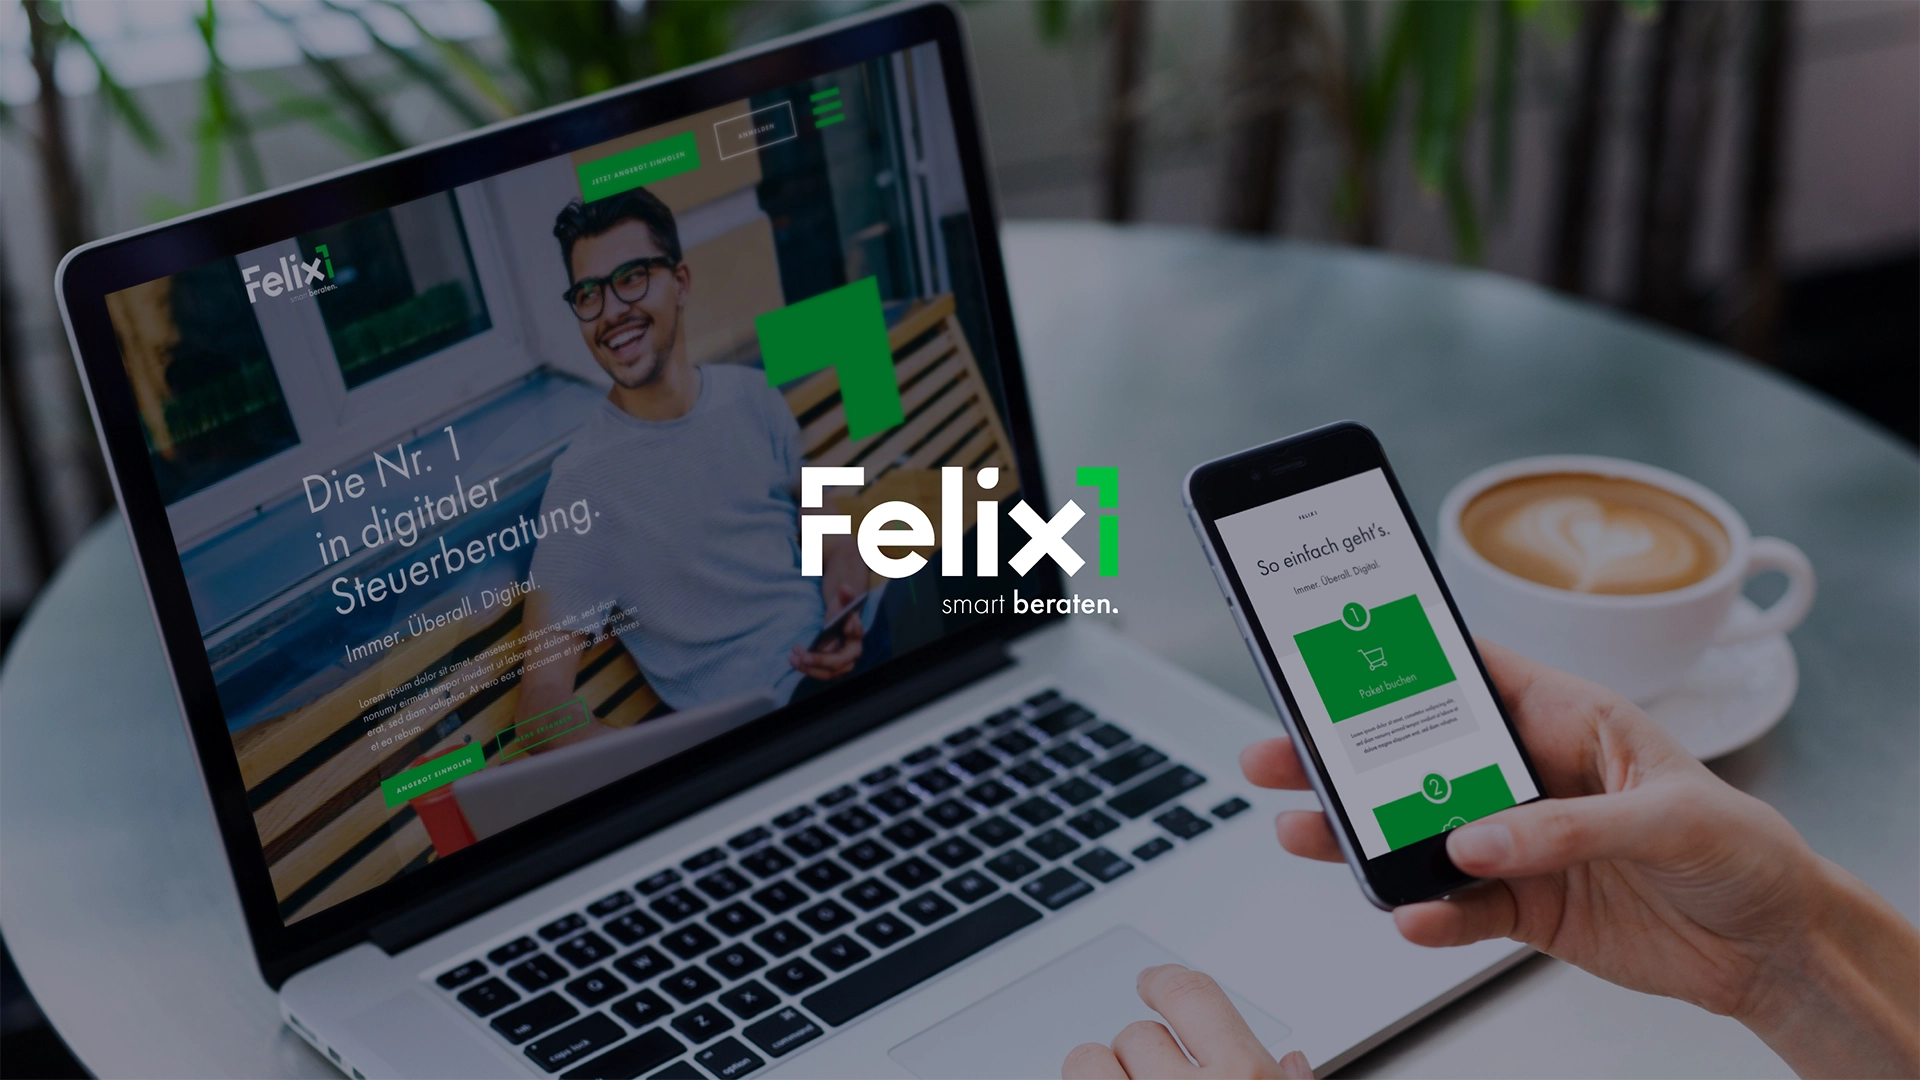 A picture shows the new design of Felix1.de AG on mobile devices.